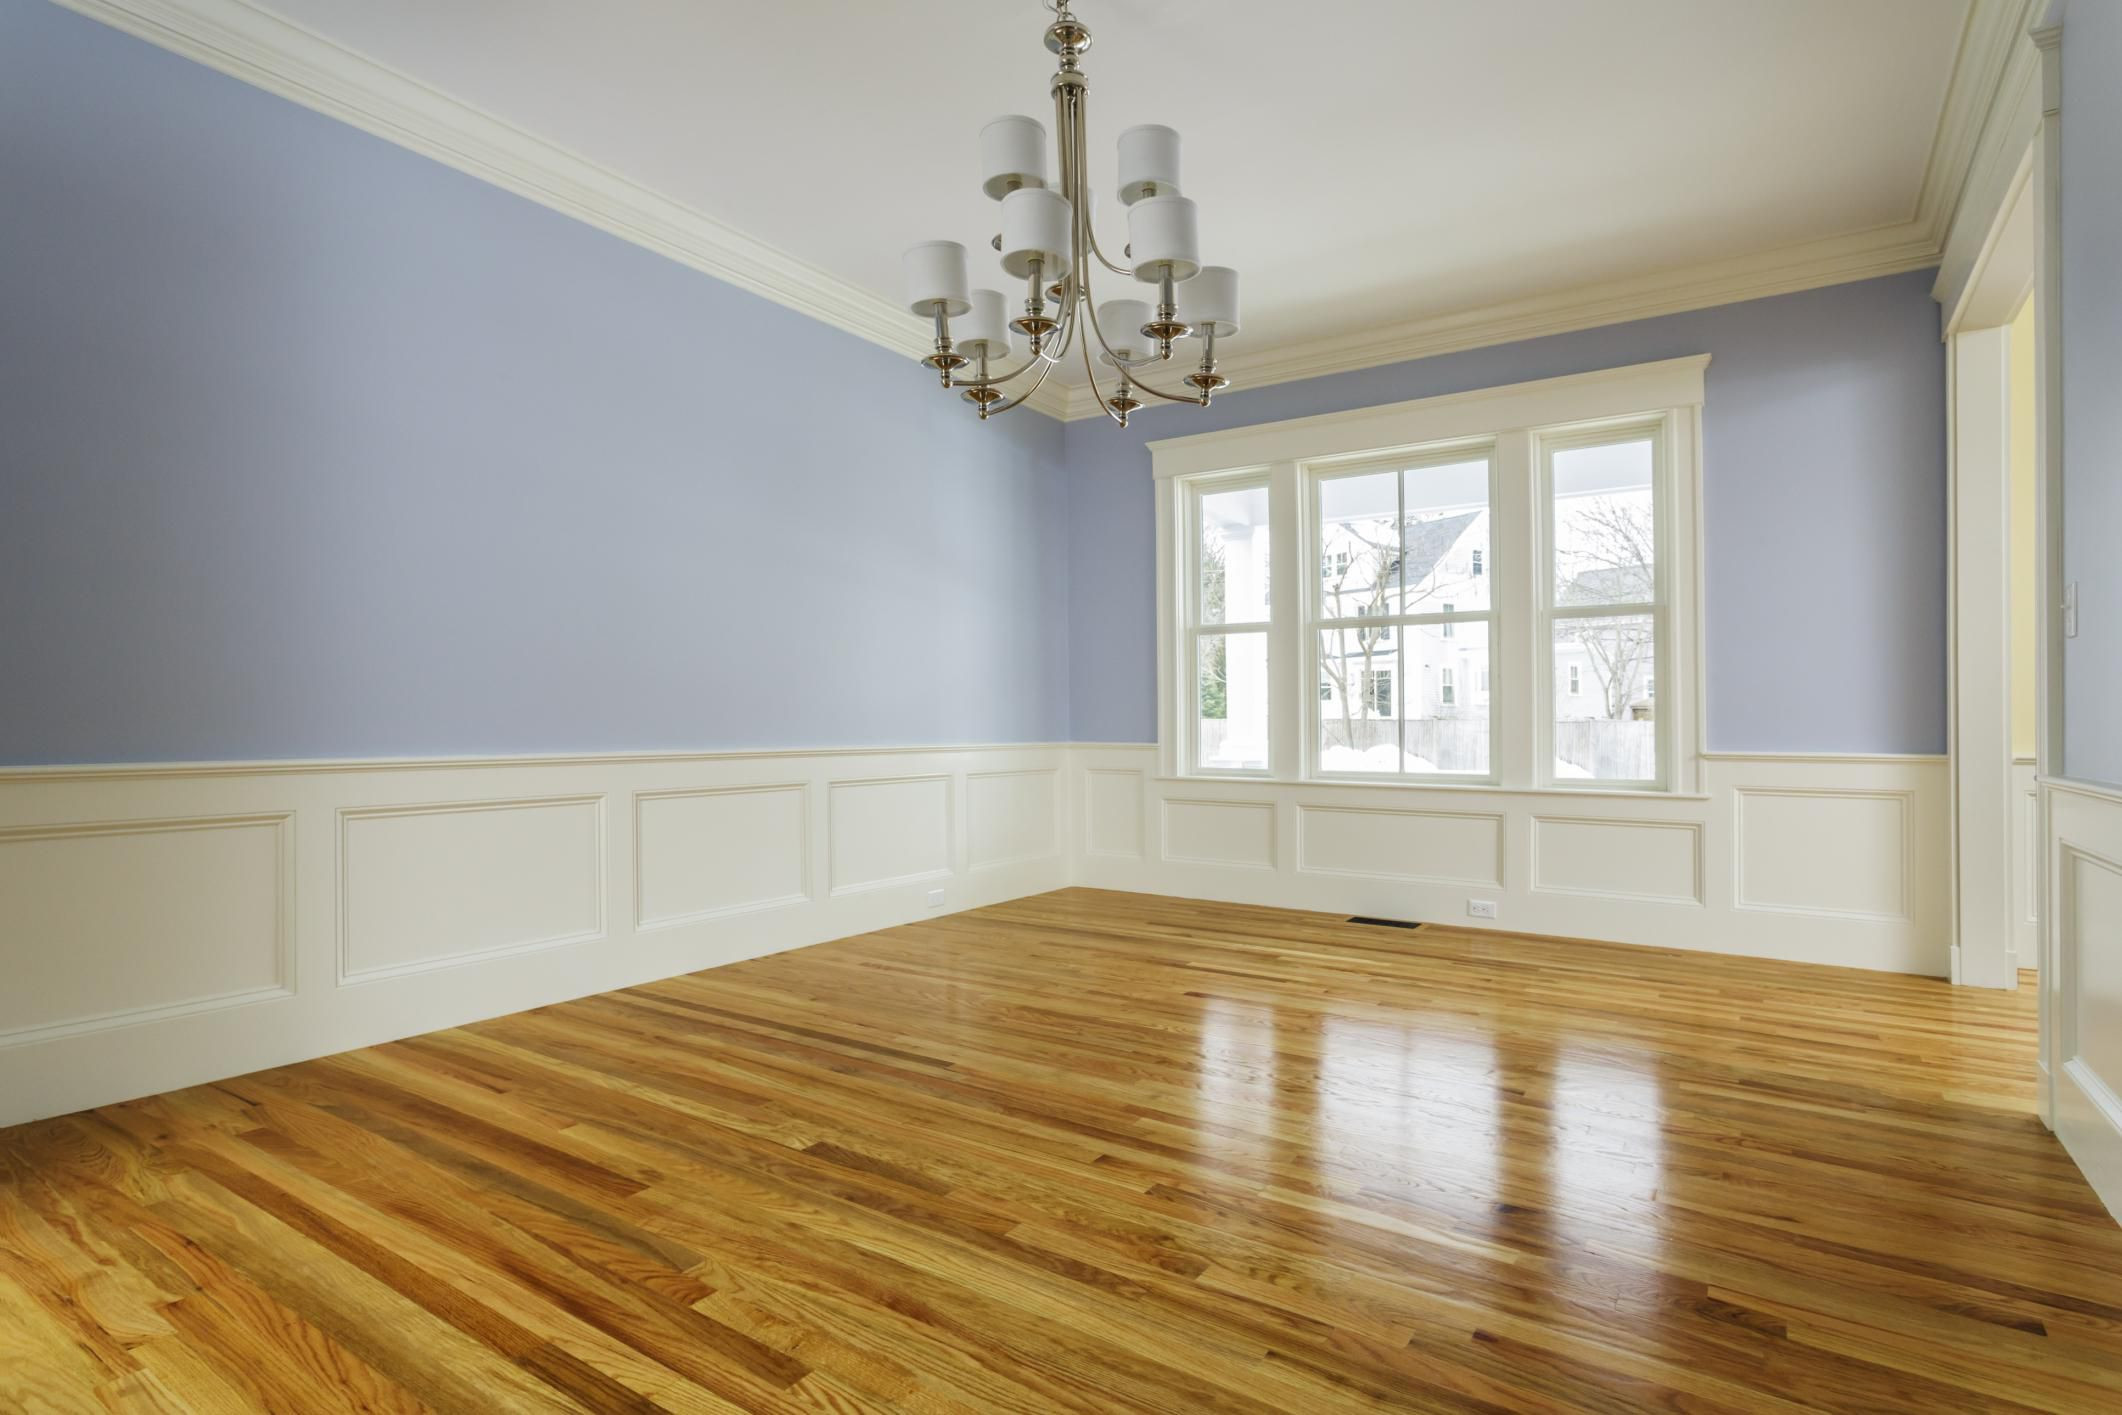 14 Recommended Unfinished Hardwood Flooring Prices 2024 free download unfinished hardwood flooring prices of engineered laminate solid hardwood wood flooring throughout 168686572 56a49ed73df78cf772834d31